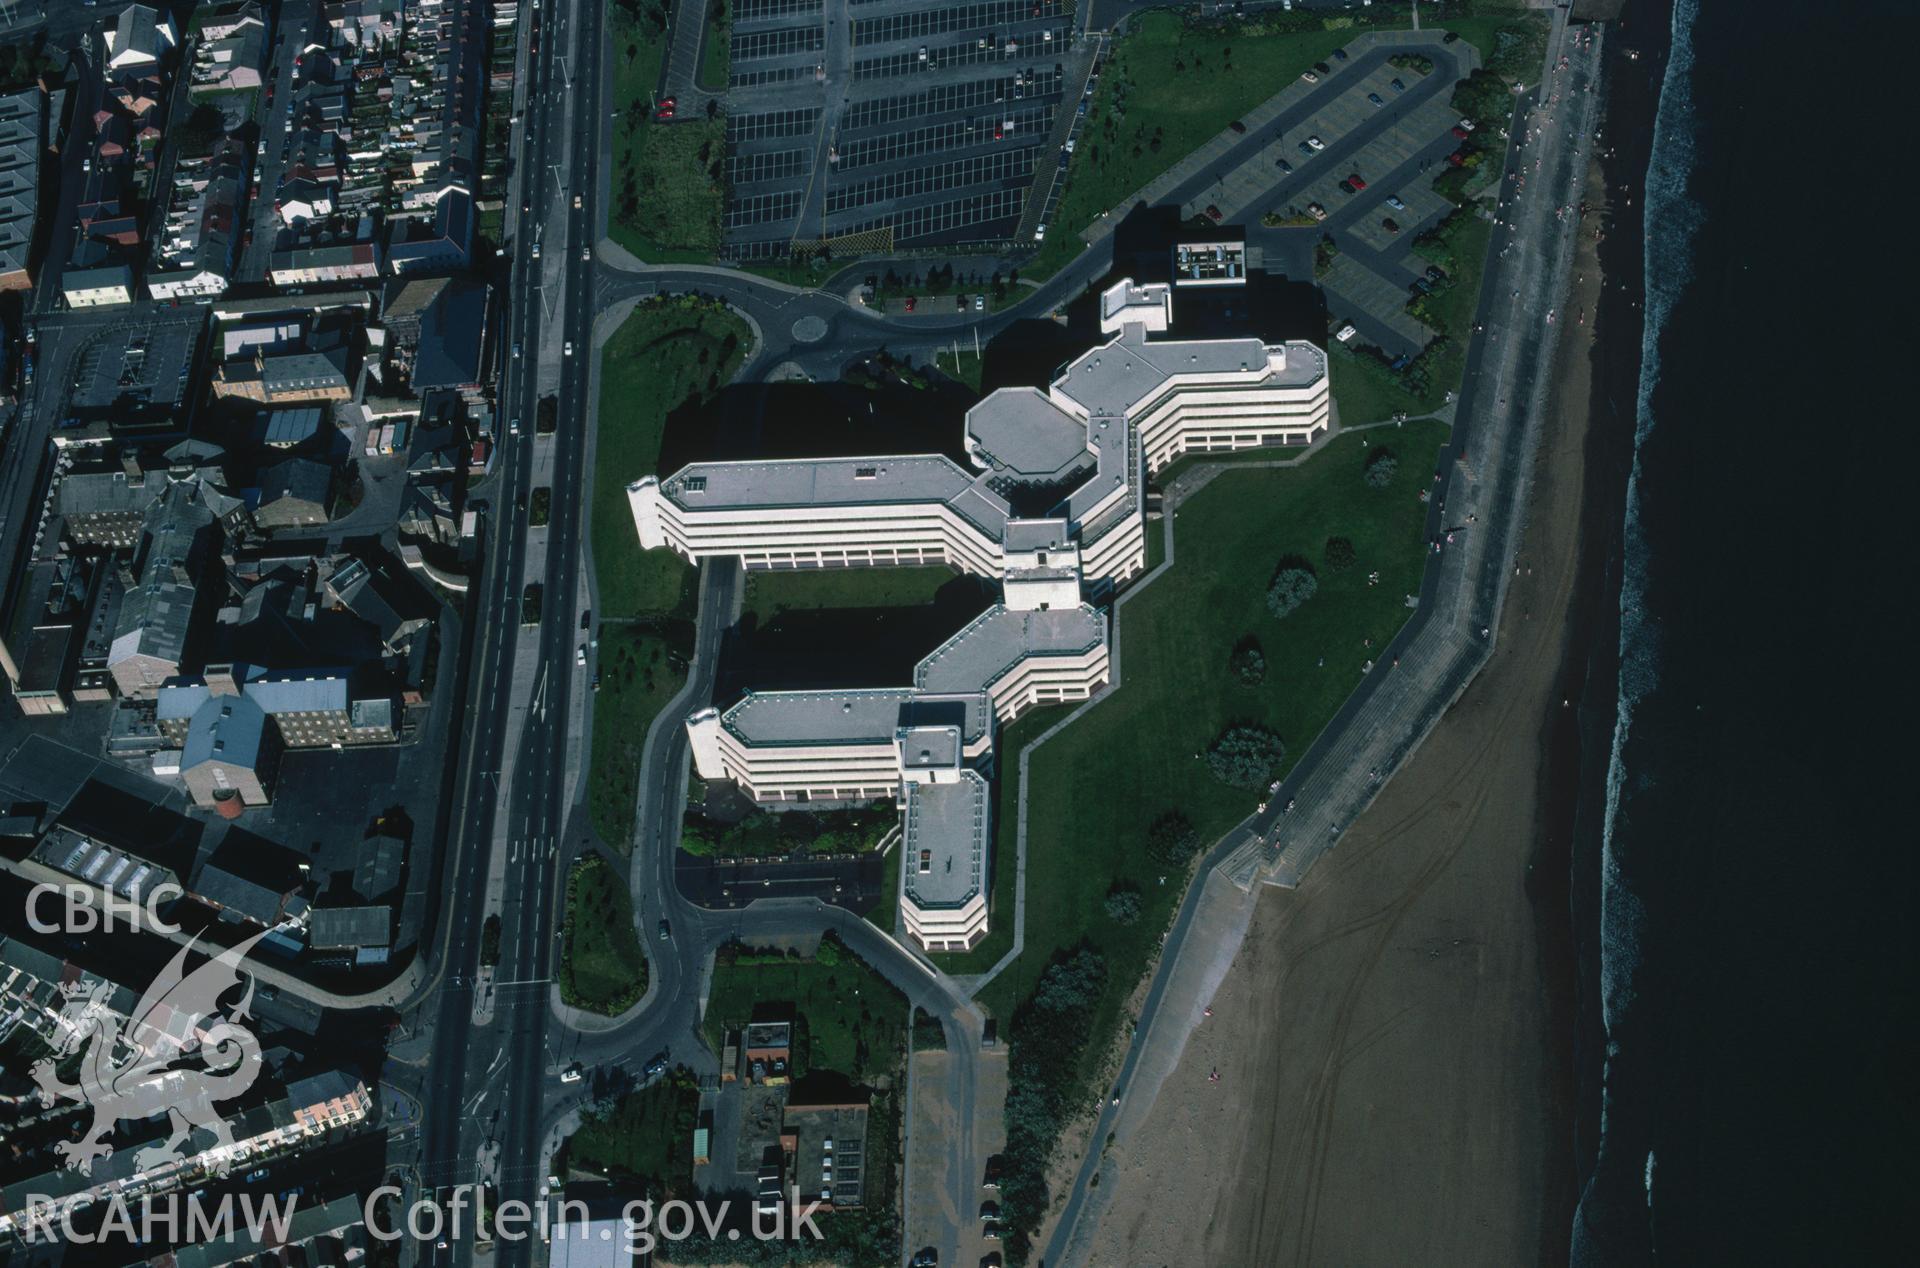 Slide of RCAHMW colour oblique aerial photograph of County Hall, Swansea, taken by C.R. Musson, 25/8/1991.